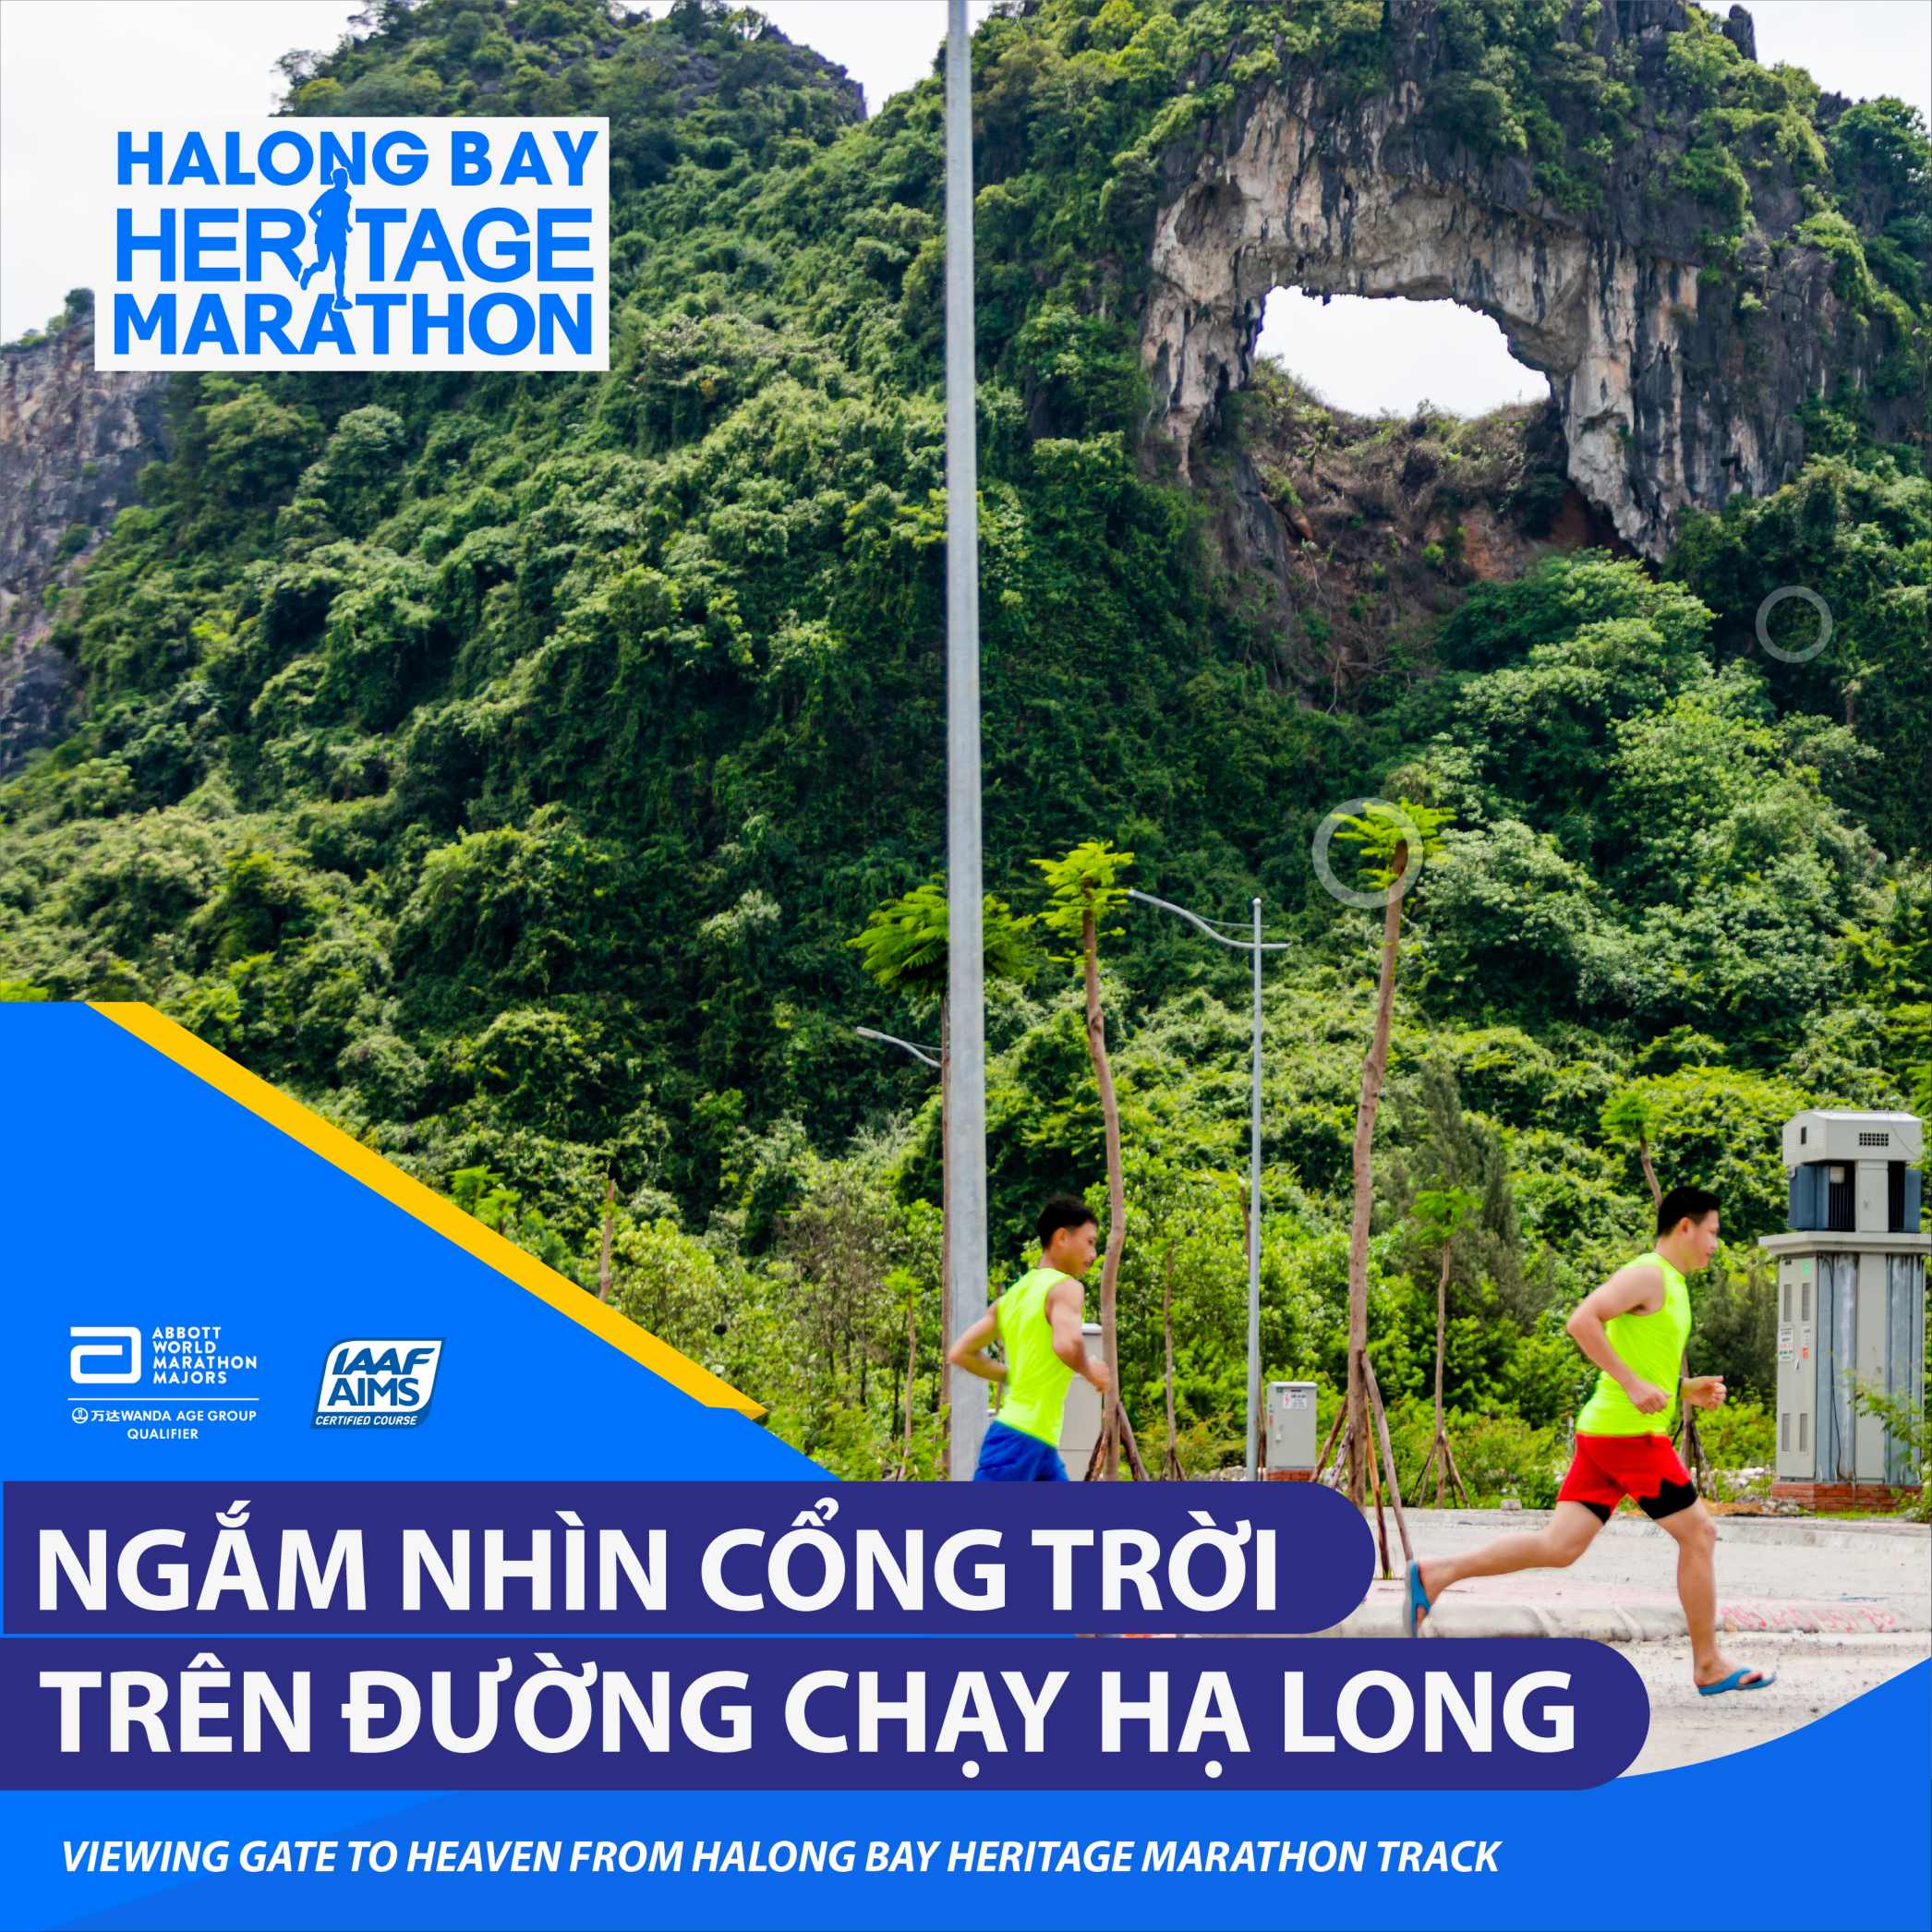 Viewing Gate To Heaven From Halong Bay Heritage Marathon Track